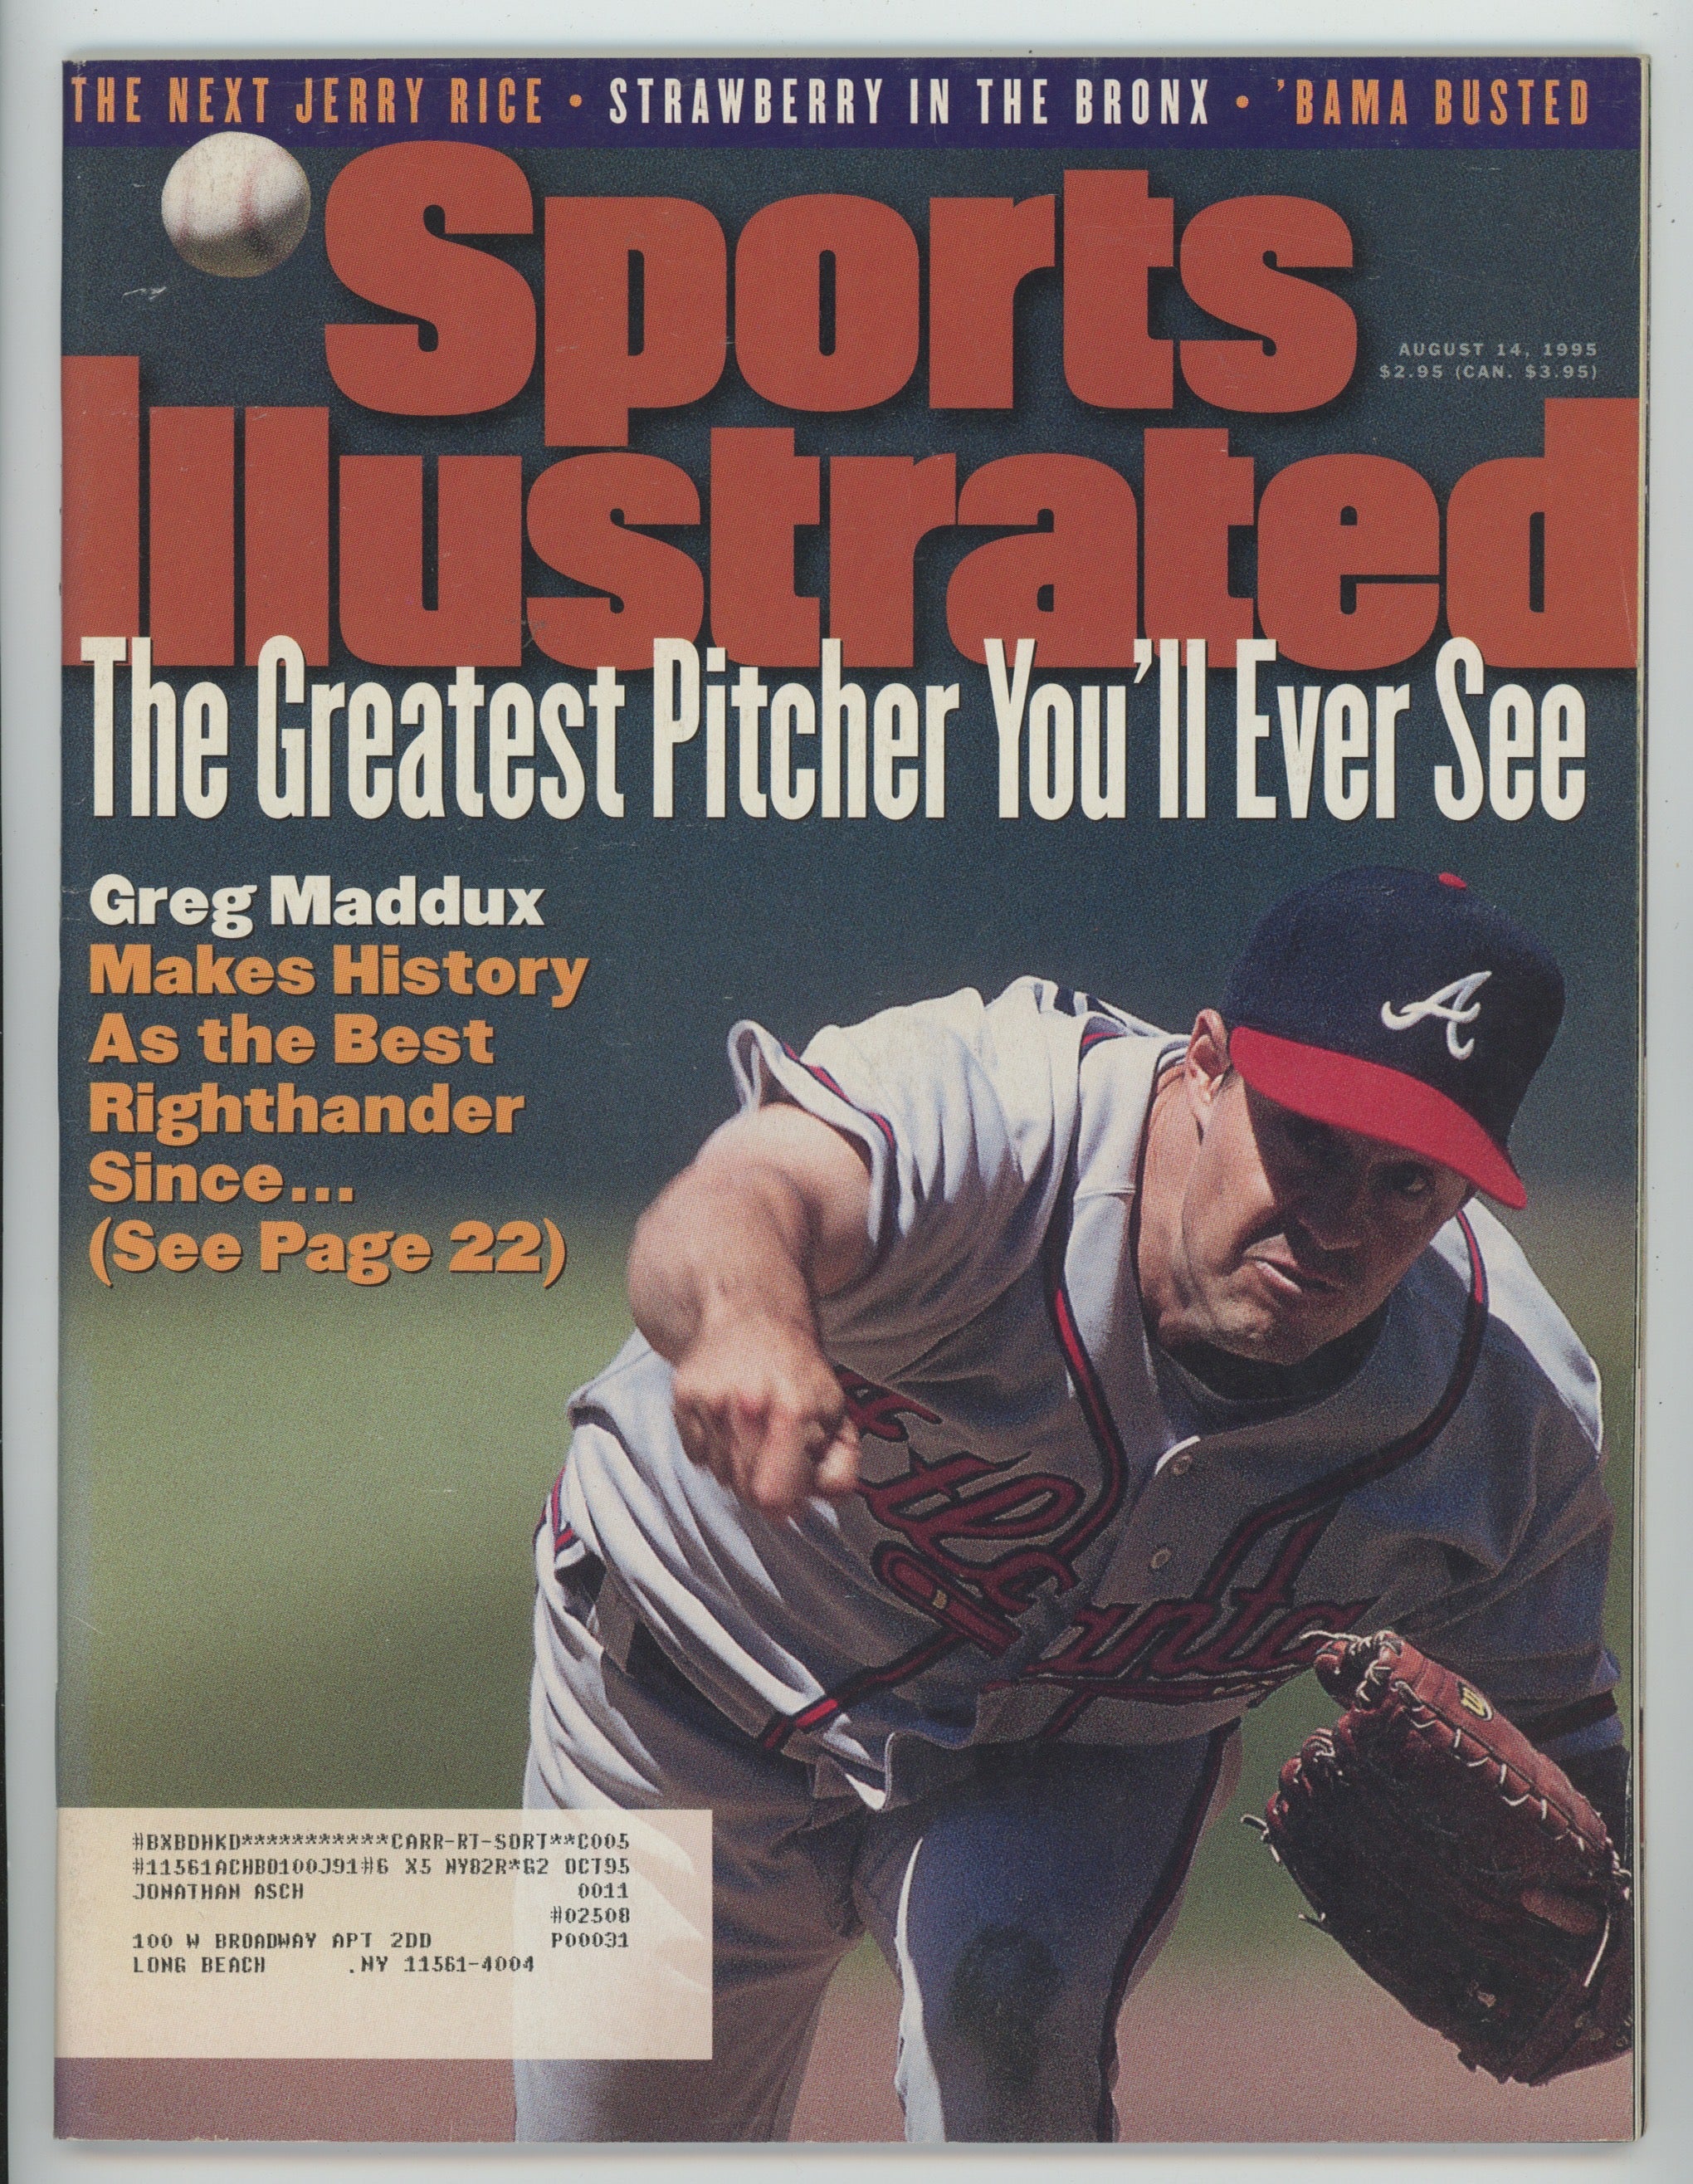 Greg Maddux Atlanta Braves "The Greatest Pitcher You'll Ever See" 8/14/95 Sports Illustrated ML